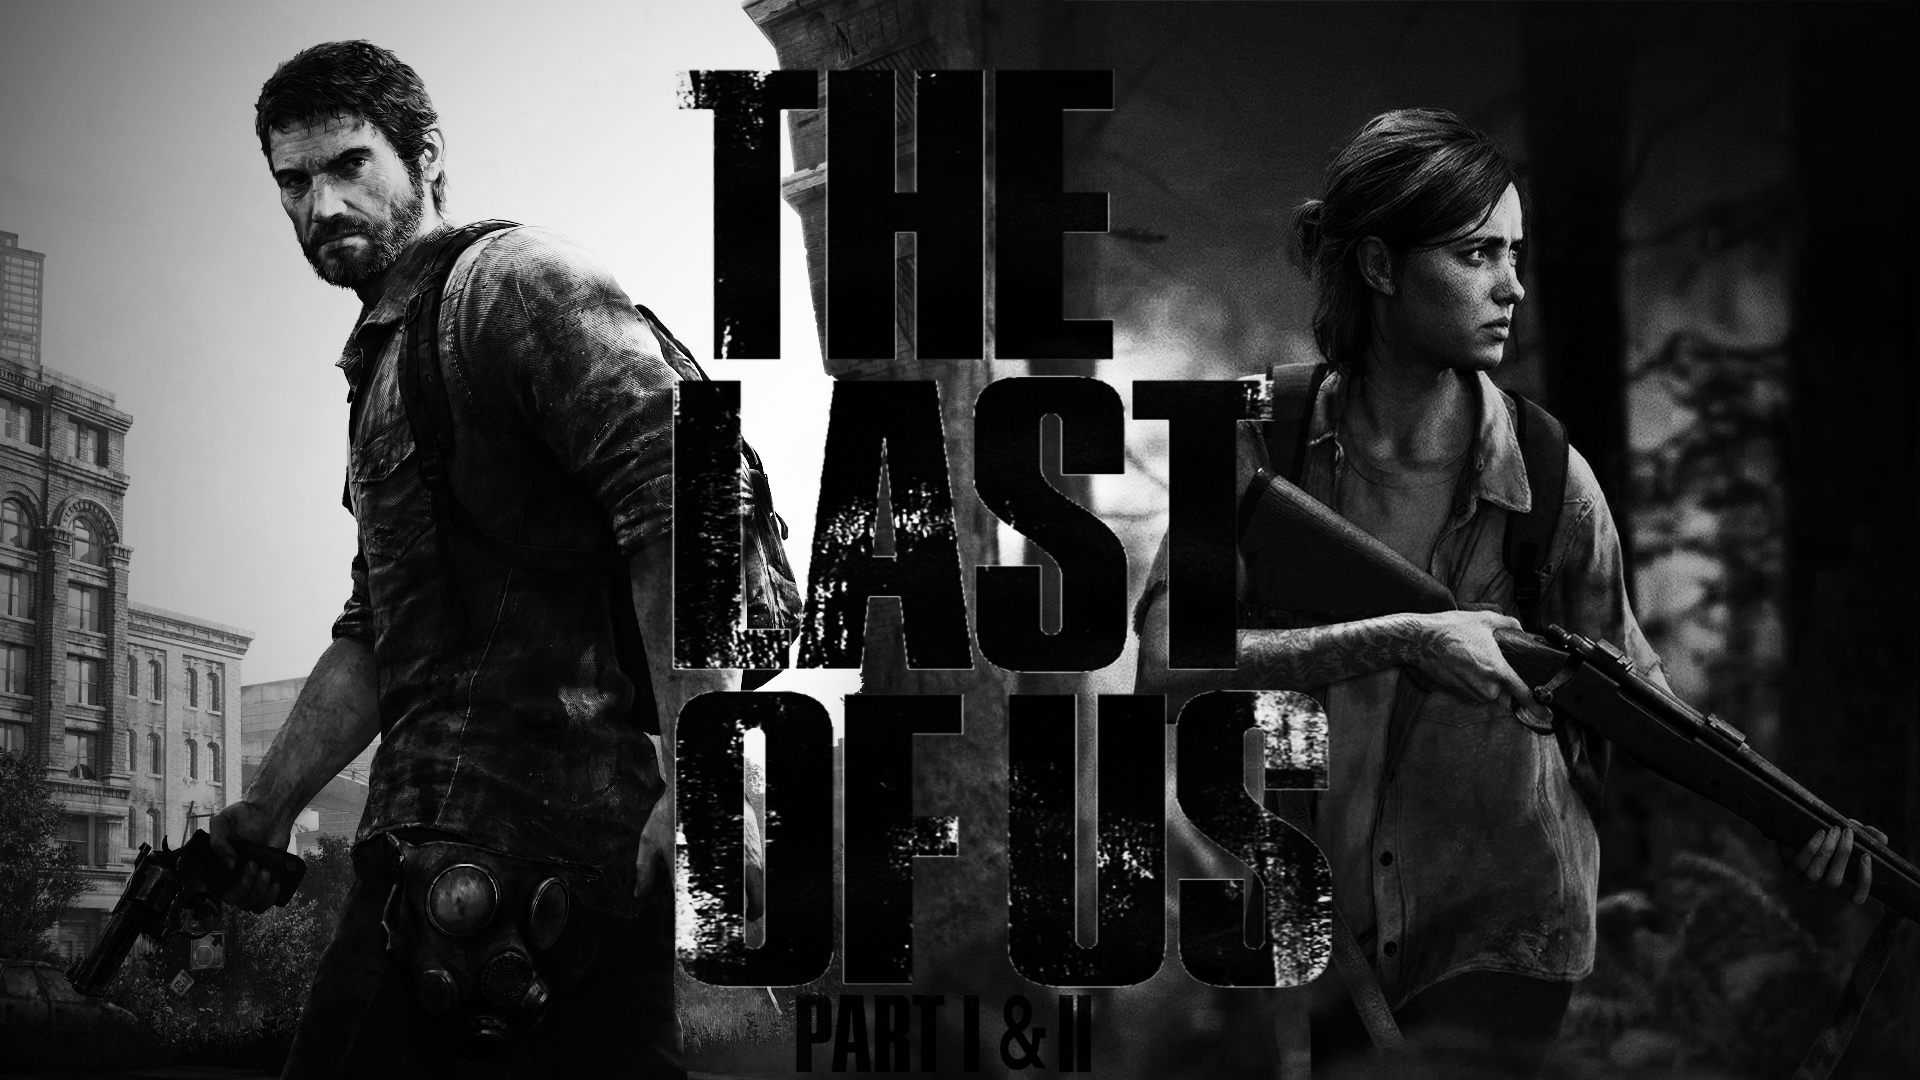 The Last of Us Part I and II Wallpaper by Thekingblader995 on